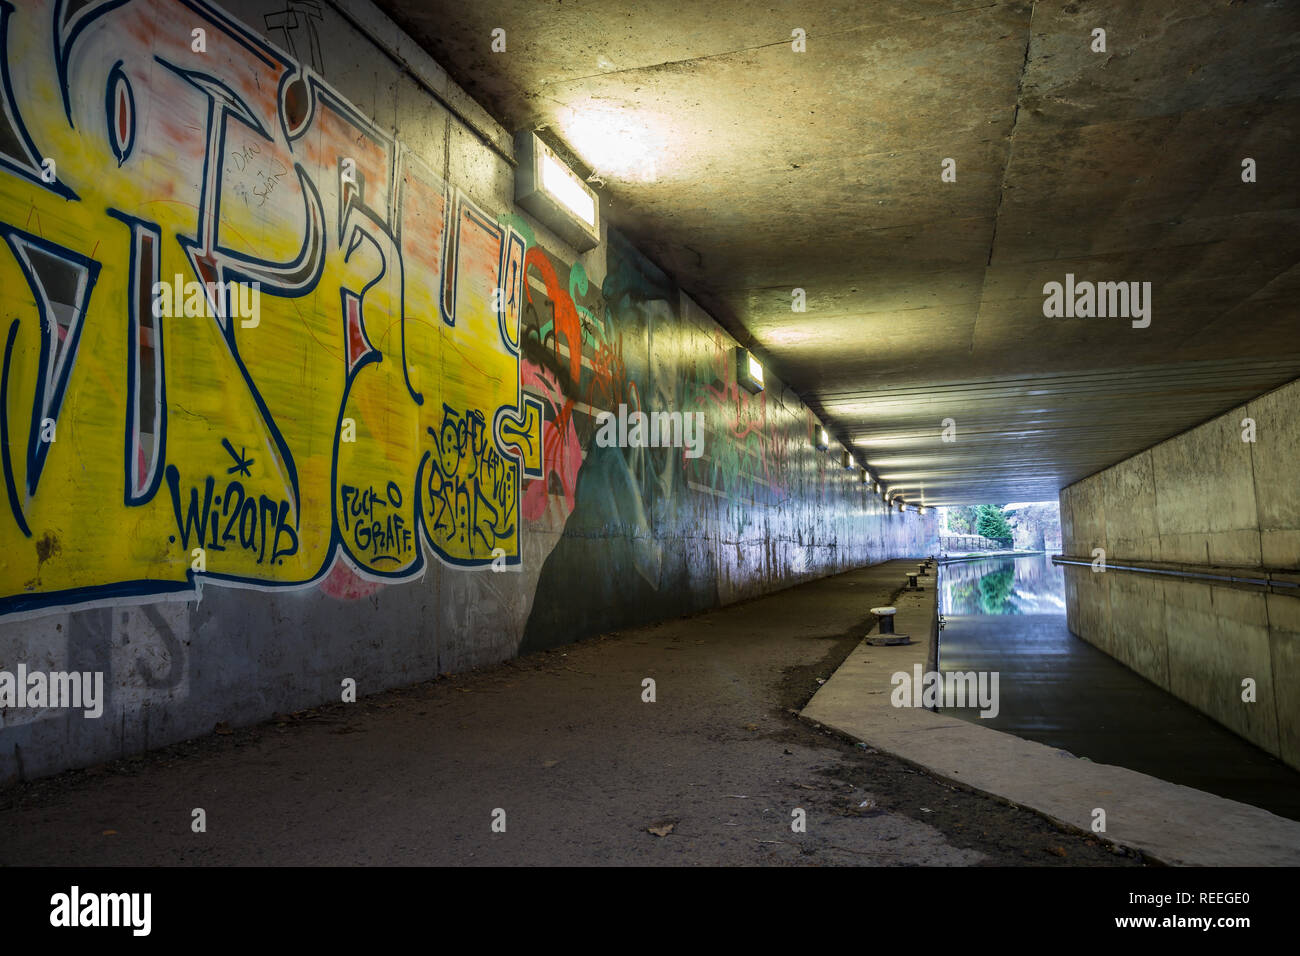 Landscape of canal side, subway graffiti sprayed on walls in pedestrian underpass, UK. Scourge of our waterways heritage or artistic expression? Stock Photo